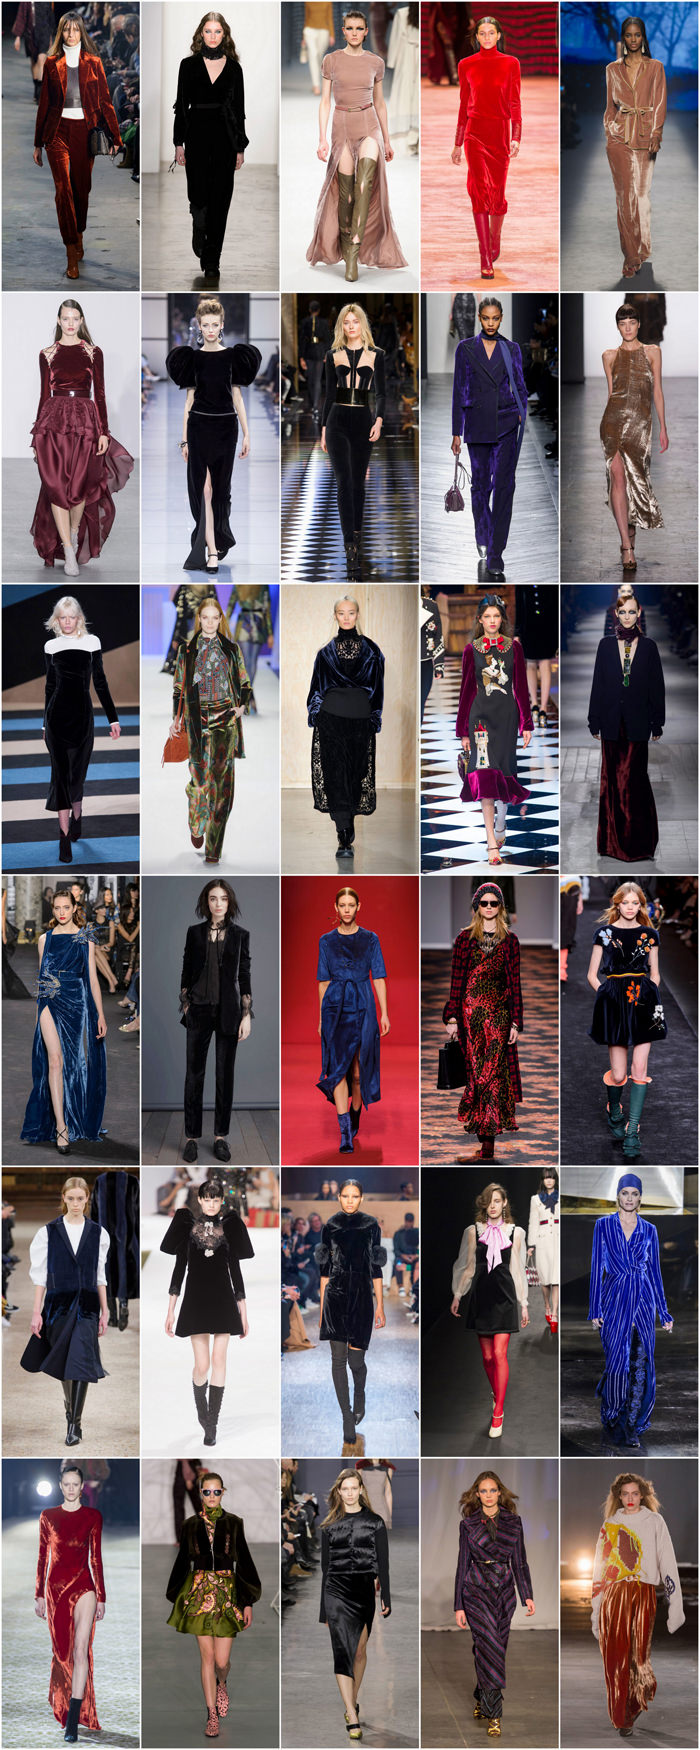 Translating-The-Trends-Fall-2016-Collection-Velvet-Fashion-Accessories-Bags-Shoes-Jewelry-Tom-Lorenzo-Site-1.jpg